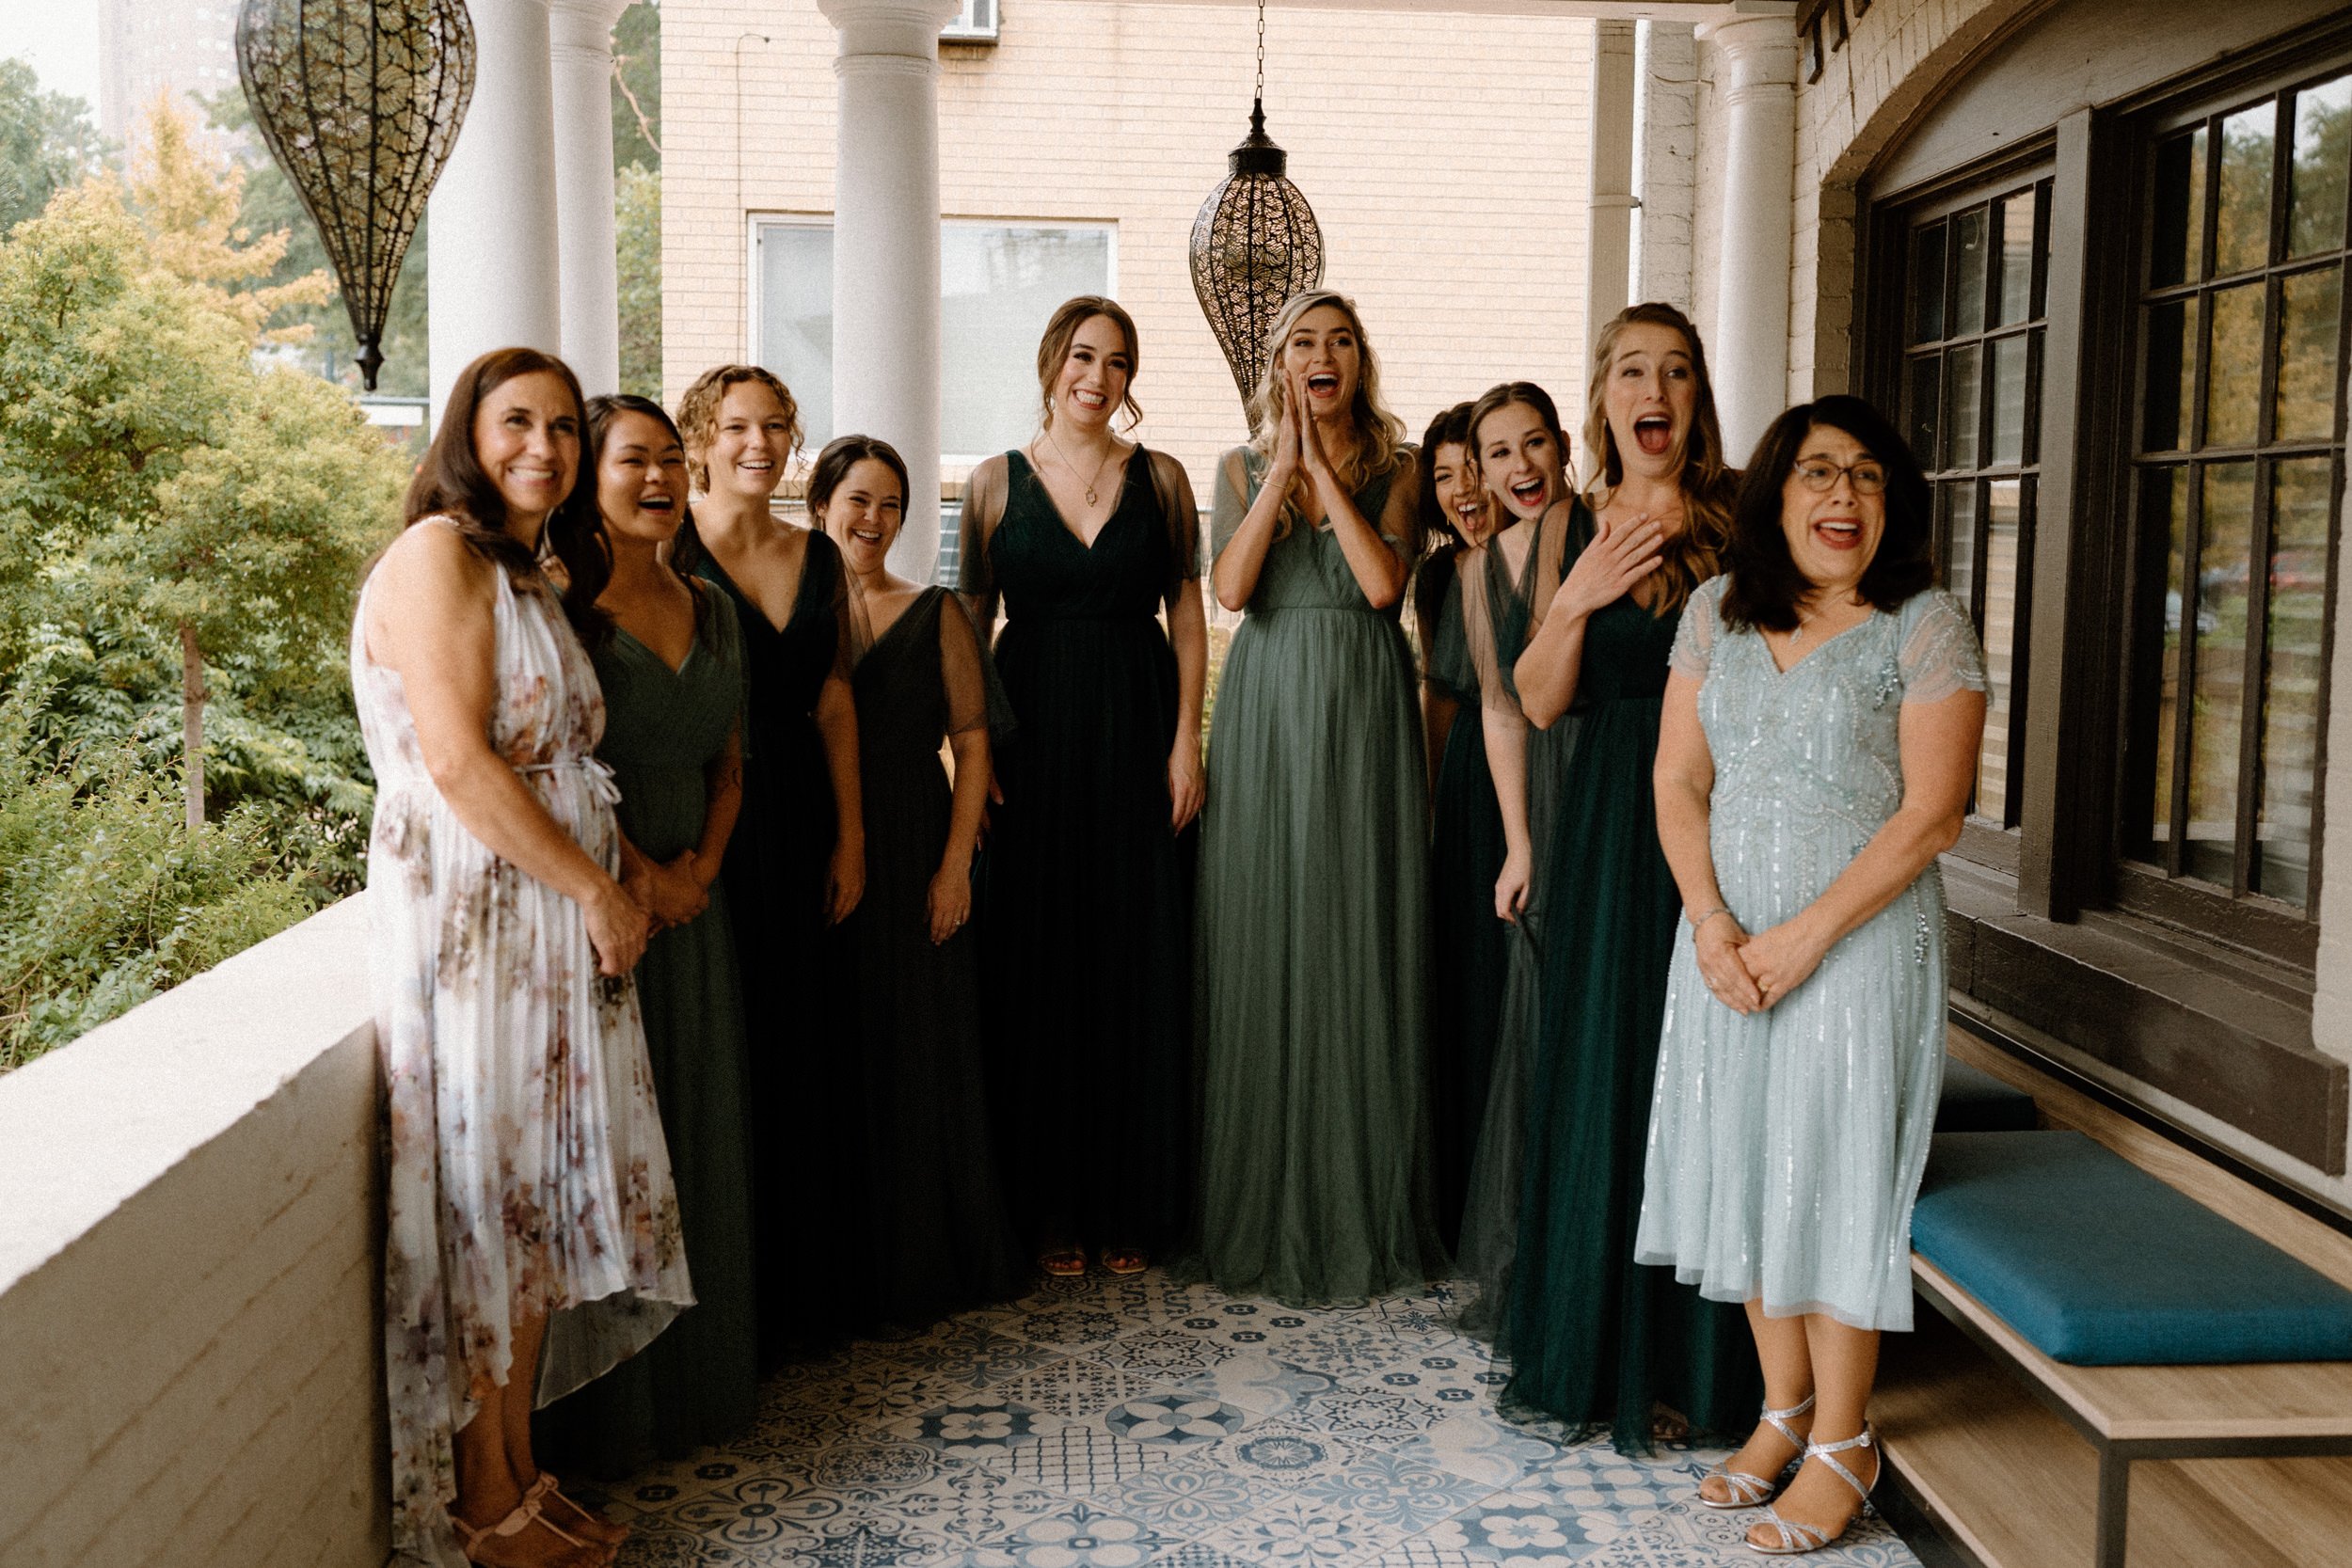 The bridesmaids smile in shock as they see the bride for the first time